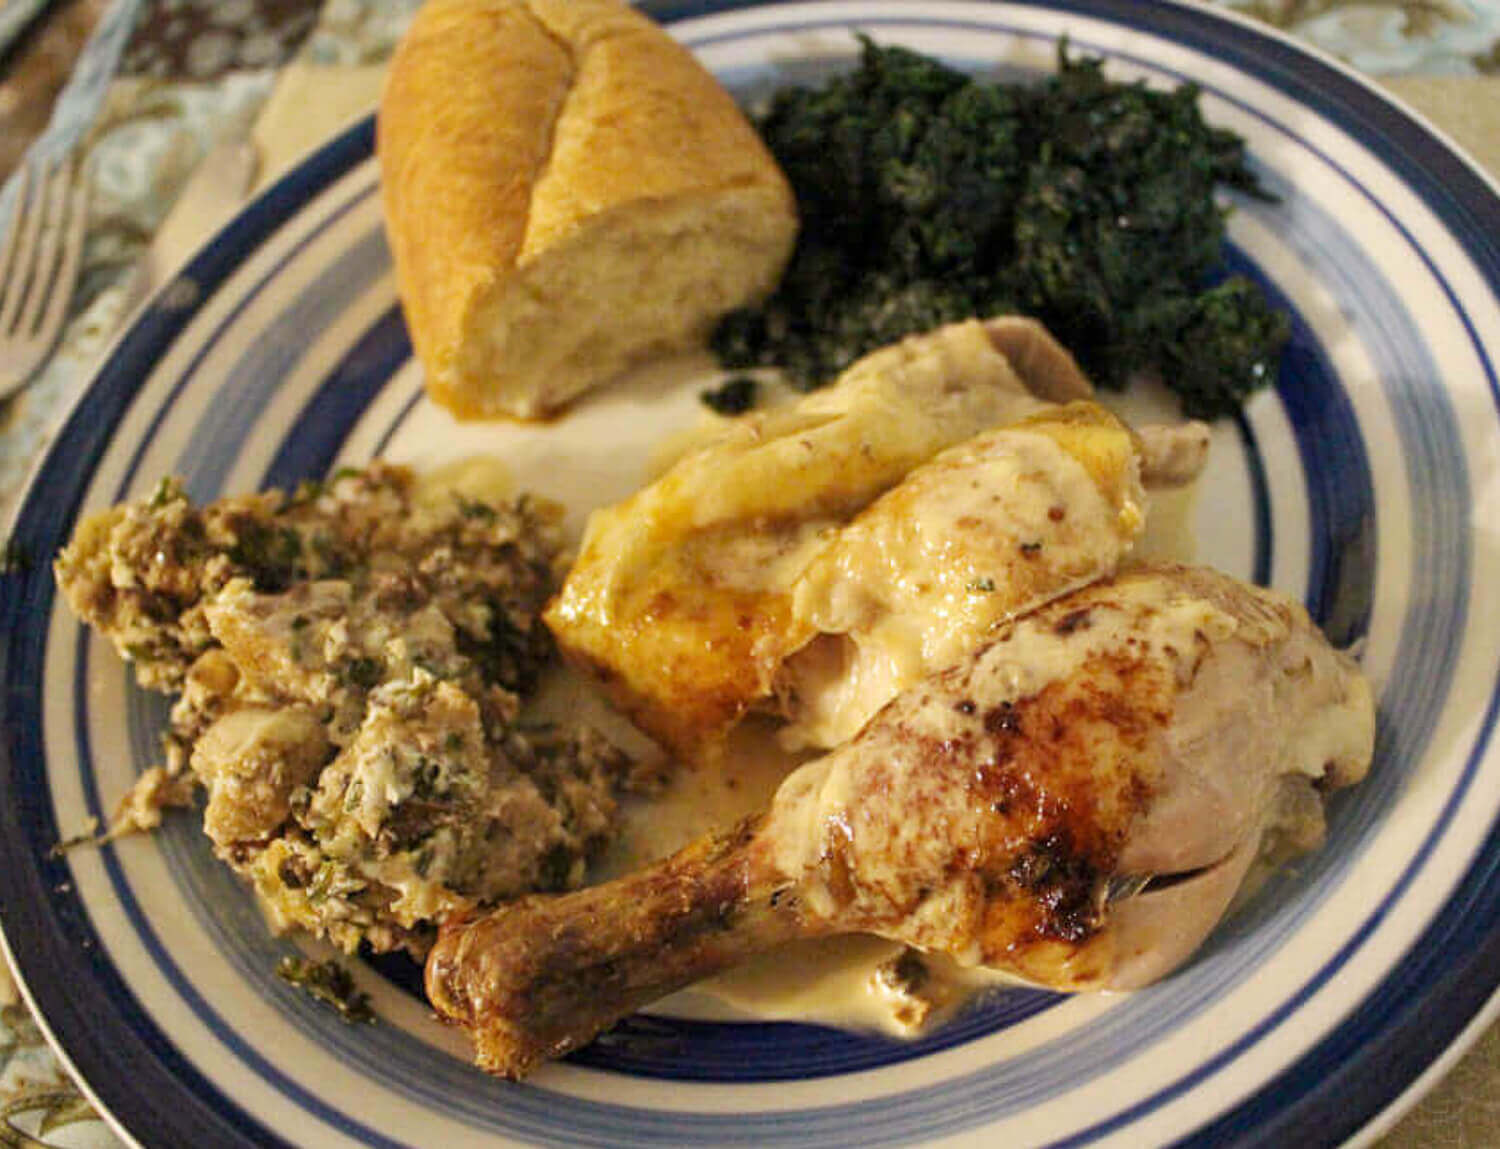 Julia Child's Poulet Roti a la Normande and Buttered Spinach